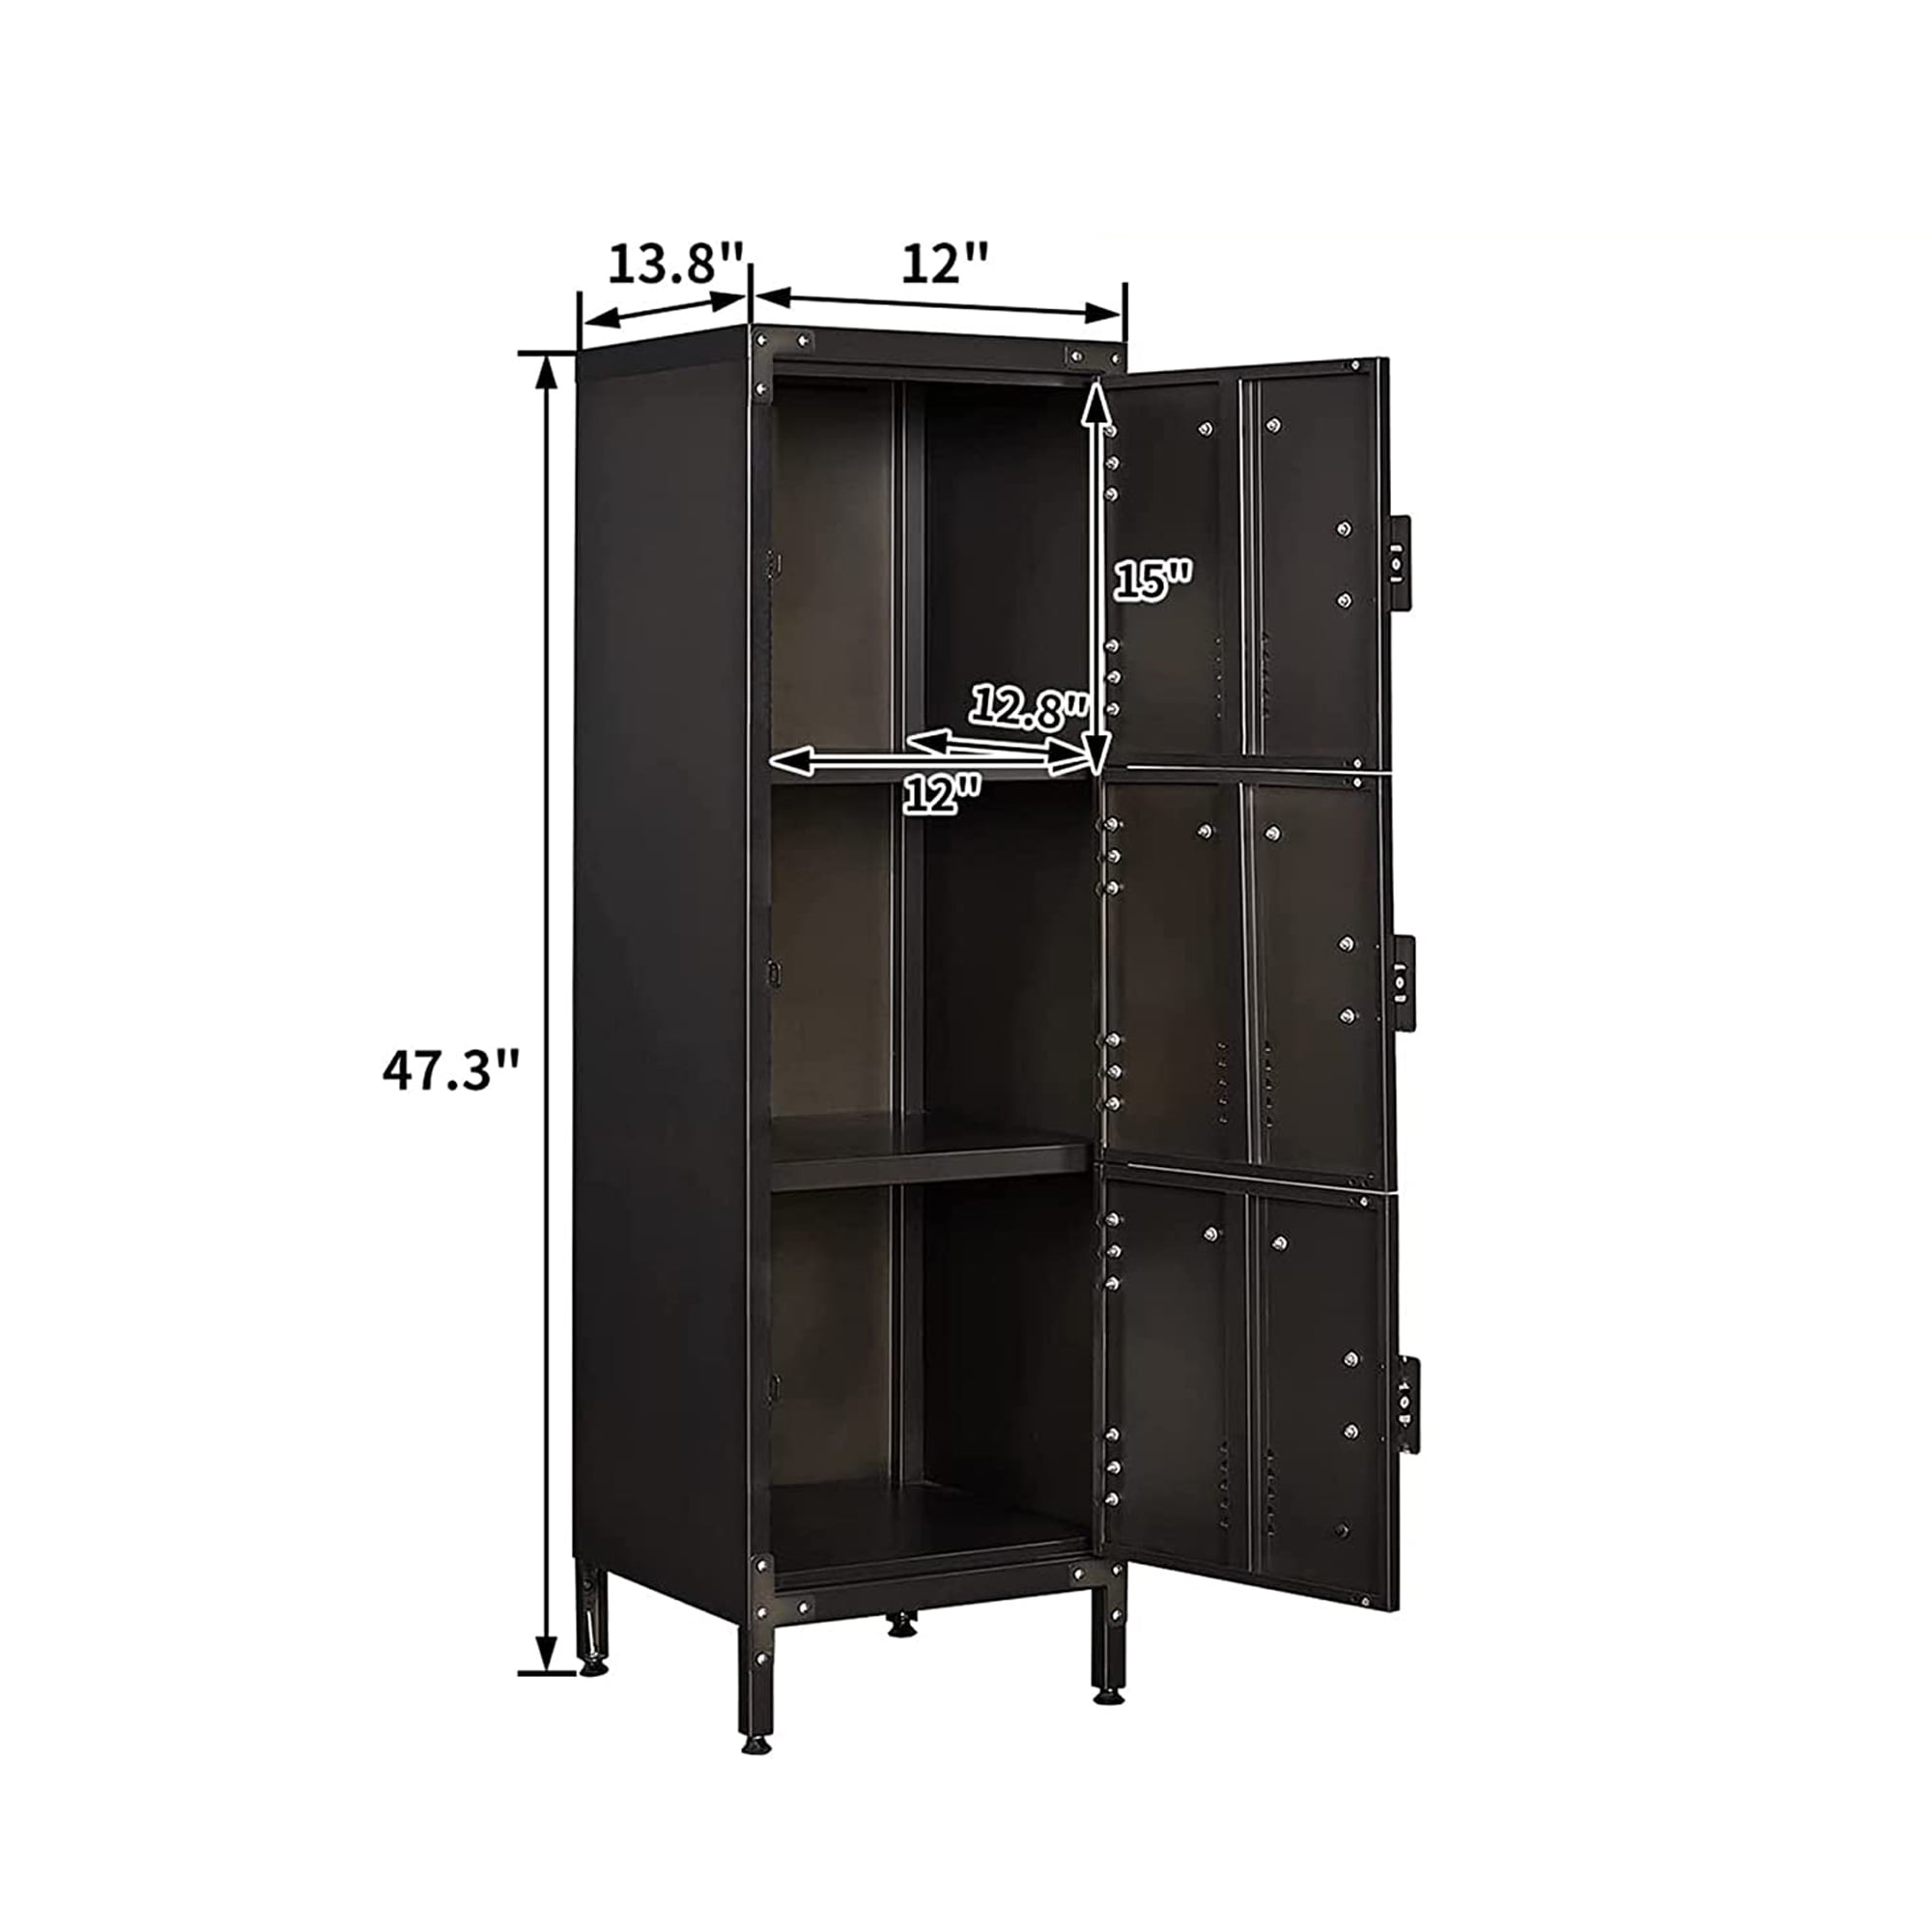 Fesbos Metal Storage Locker Cabinet with 1 Door, Steel Wardrobe Cabinet  with Hanging Hooks, Locker for Bedroom, Home Office, Gym and Changing Room